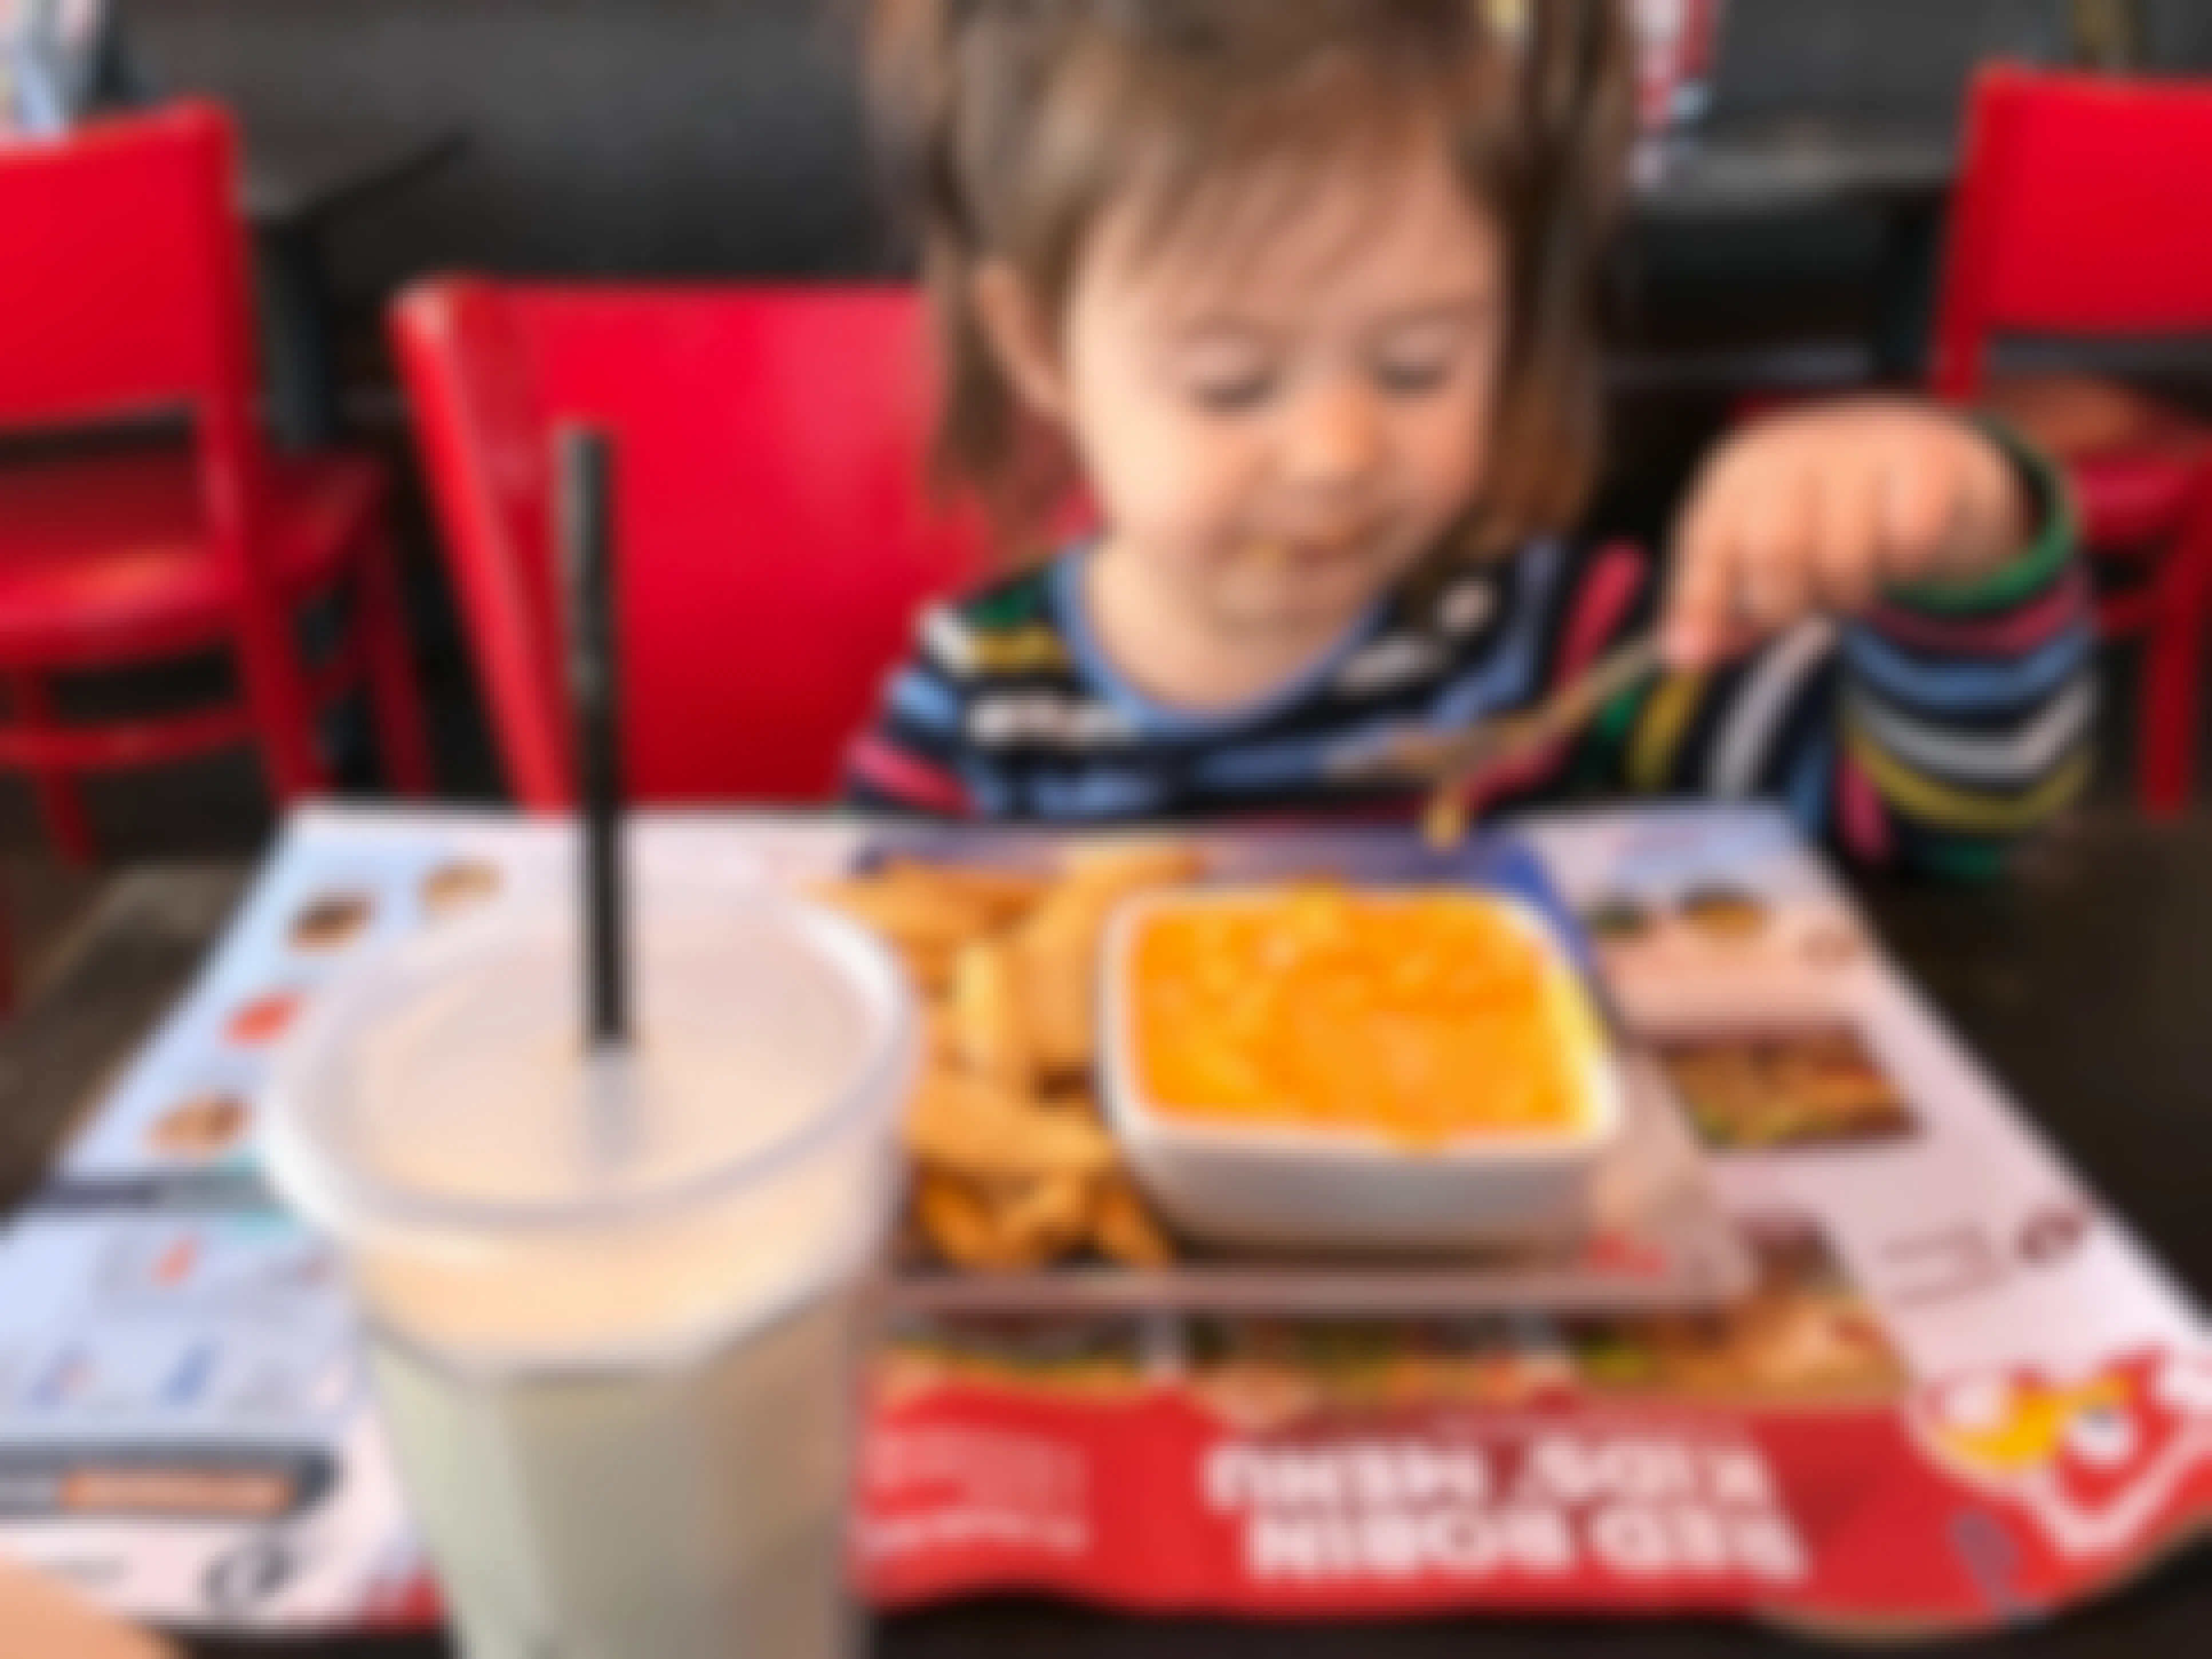 Wednesday Food Deals Are Here: Free Kids Meals & More